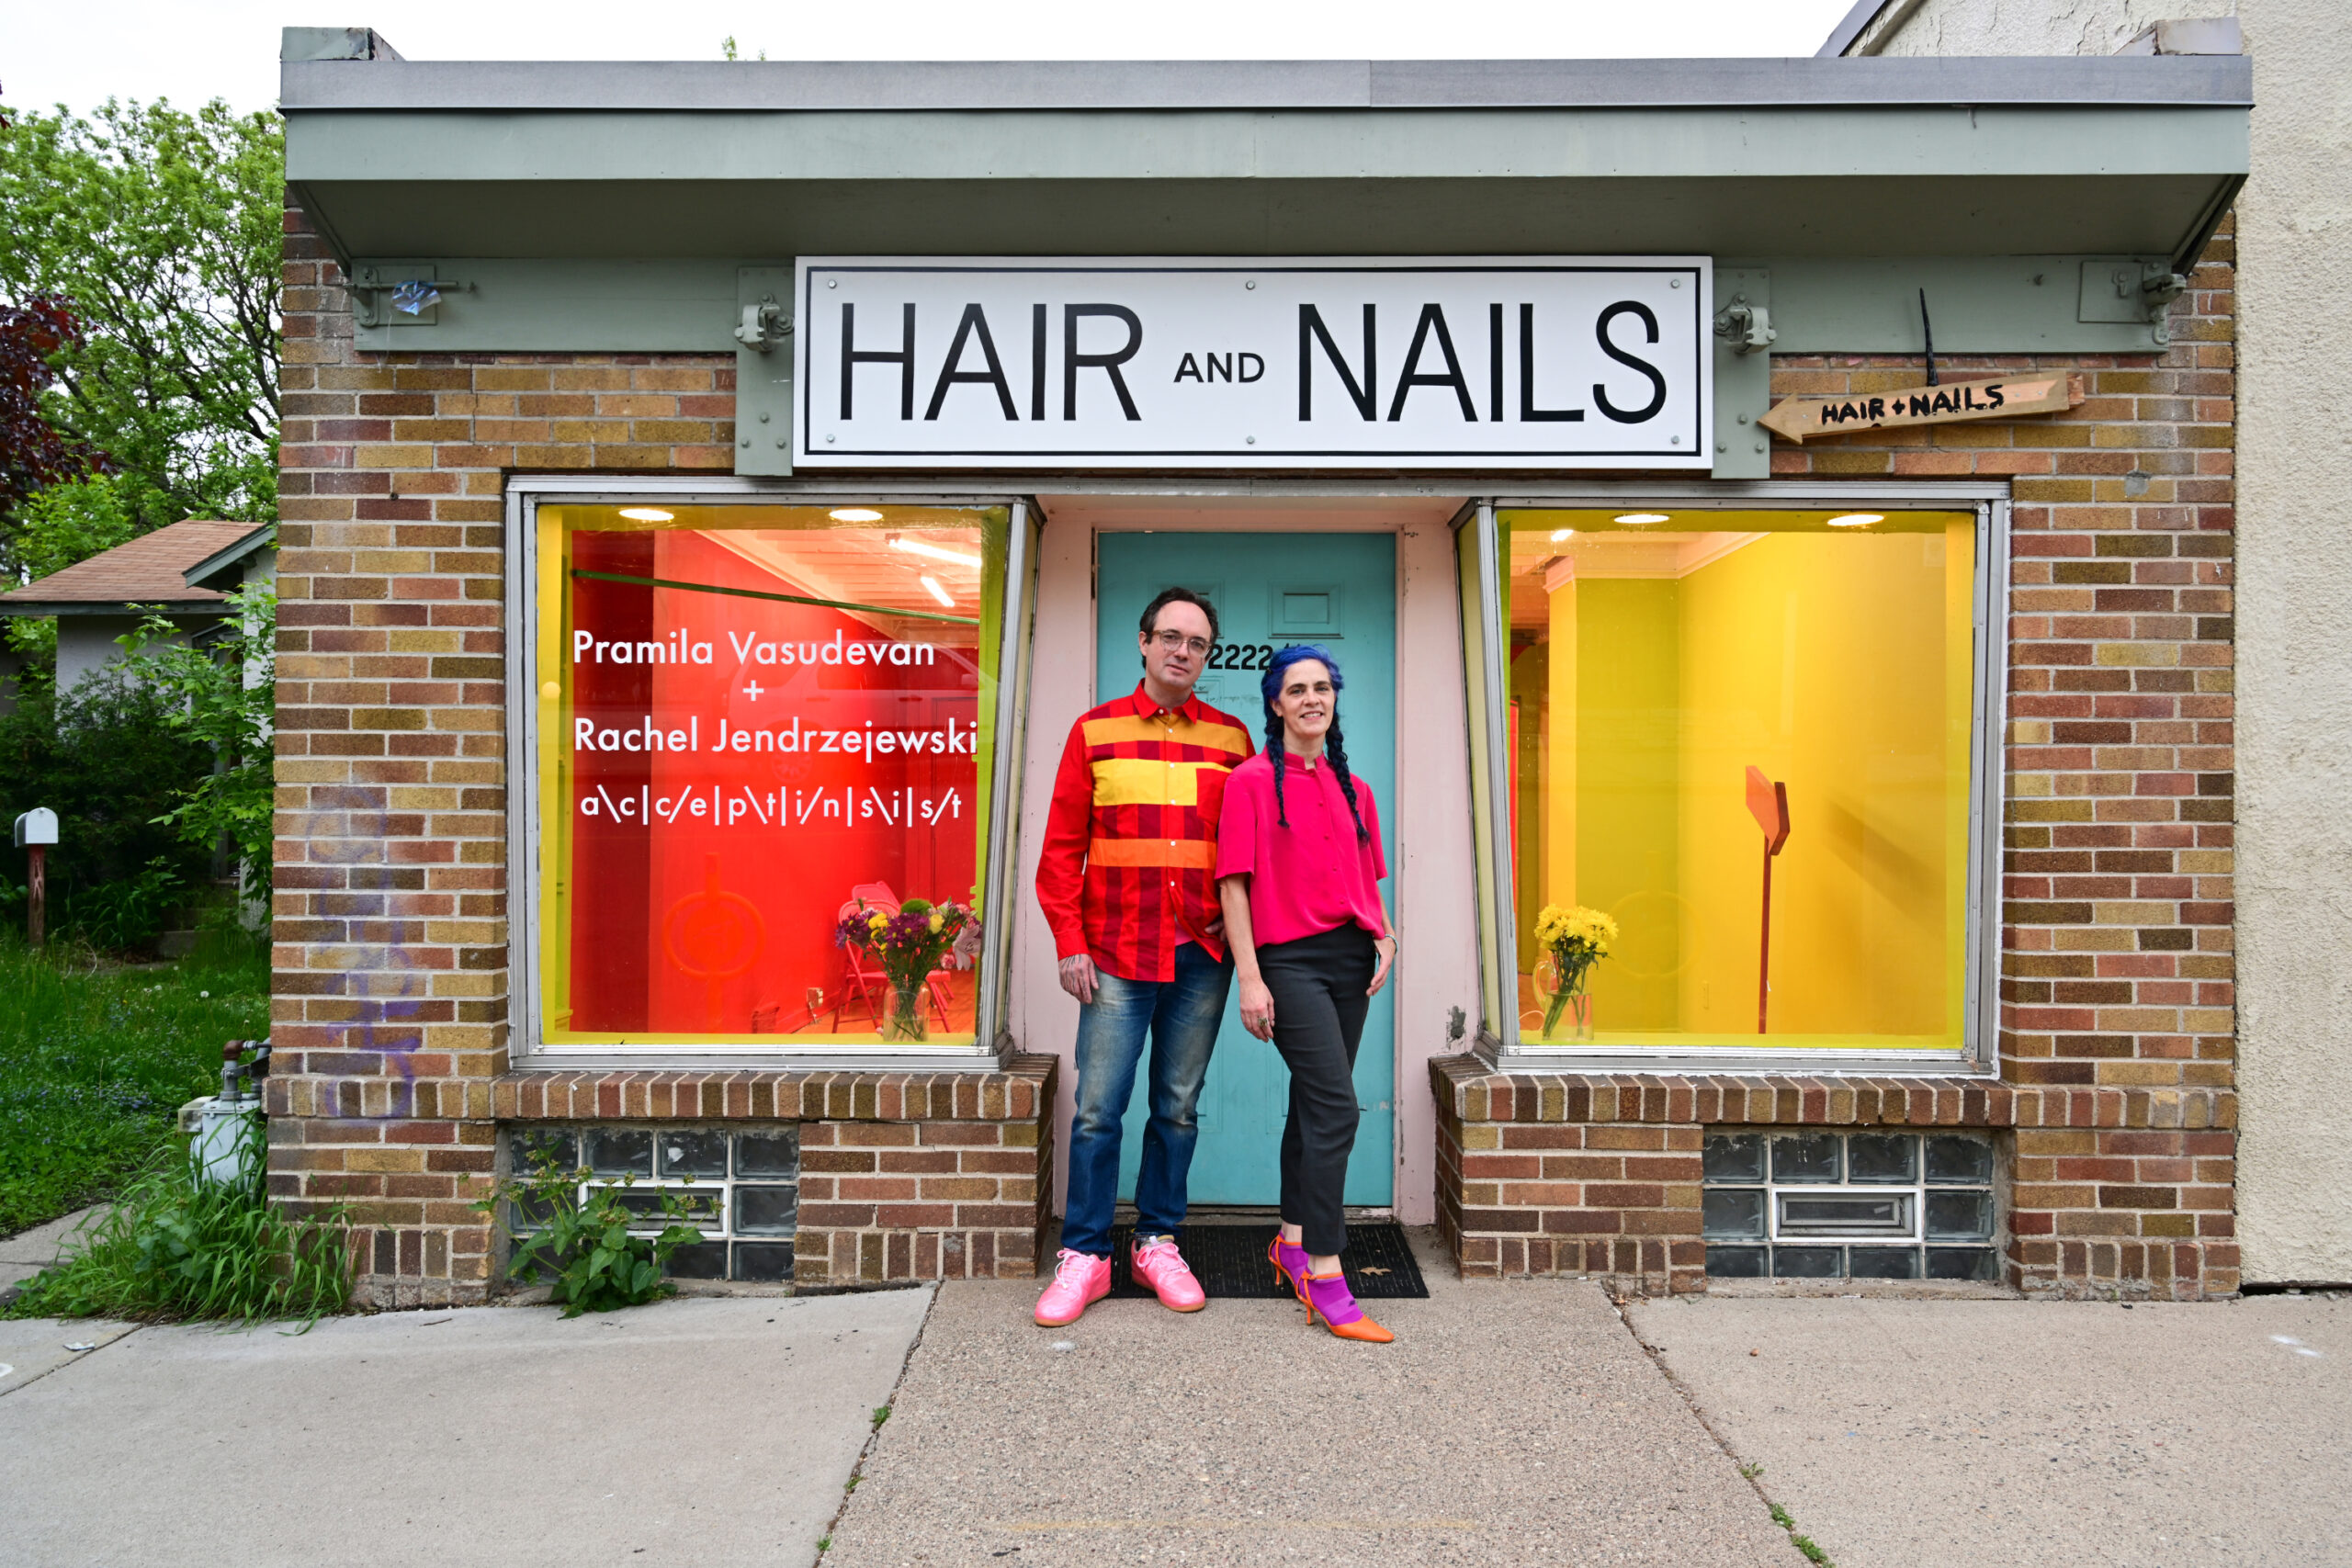 Two people stand in front of gallery with red and yellow visible through windows, teal door and sign reading HAIR and NAILS.